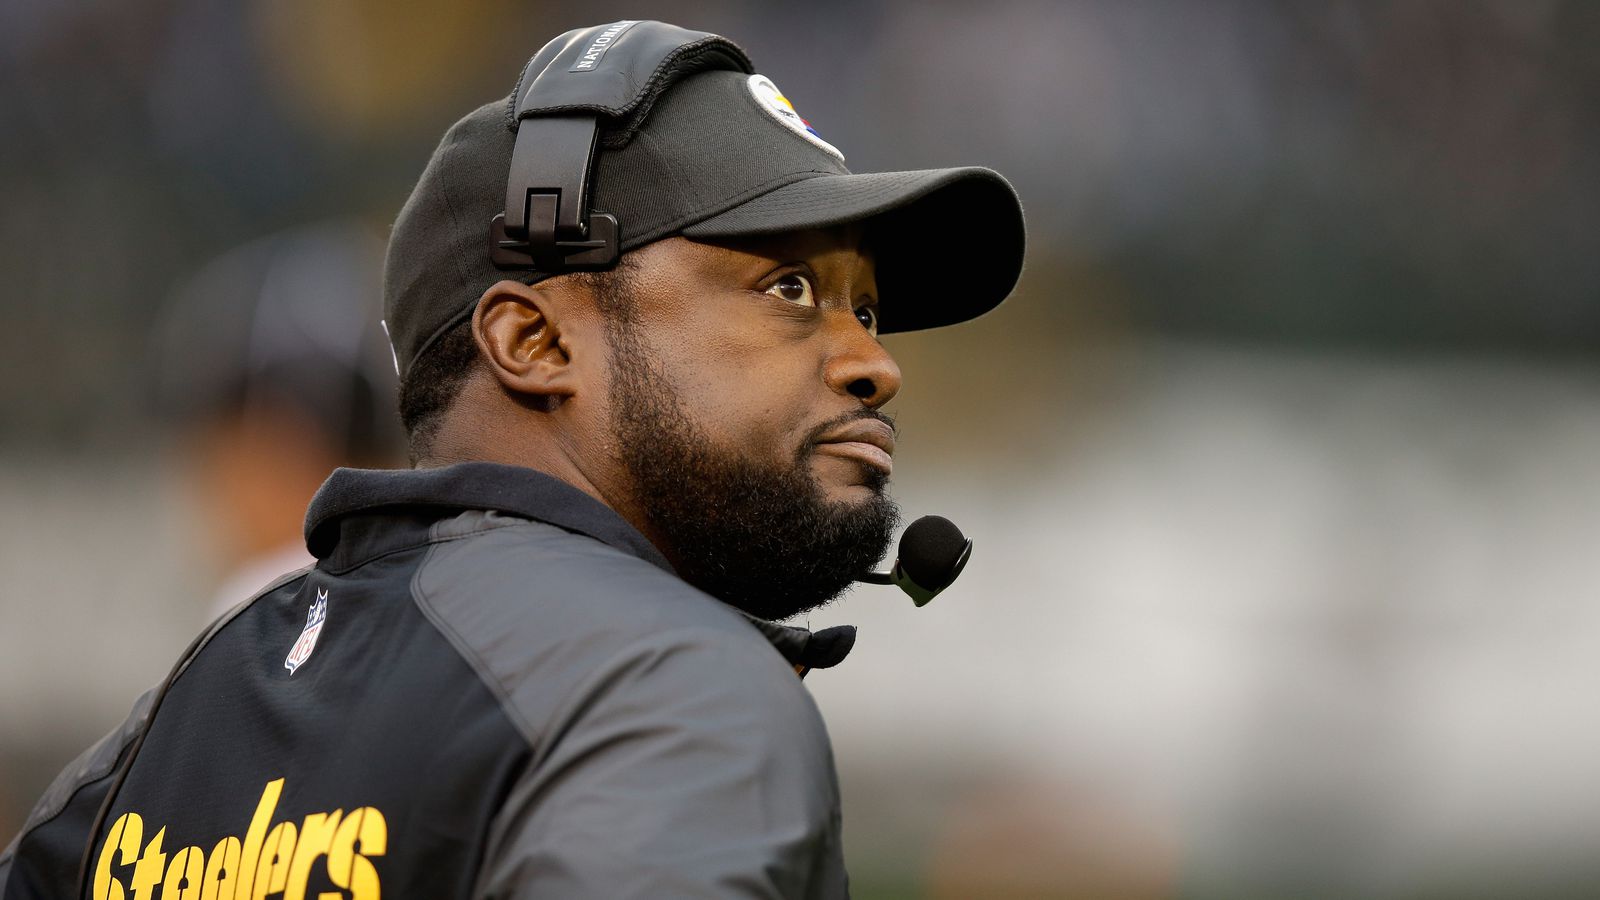 Mike Tomlin fined $100,000.